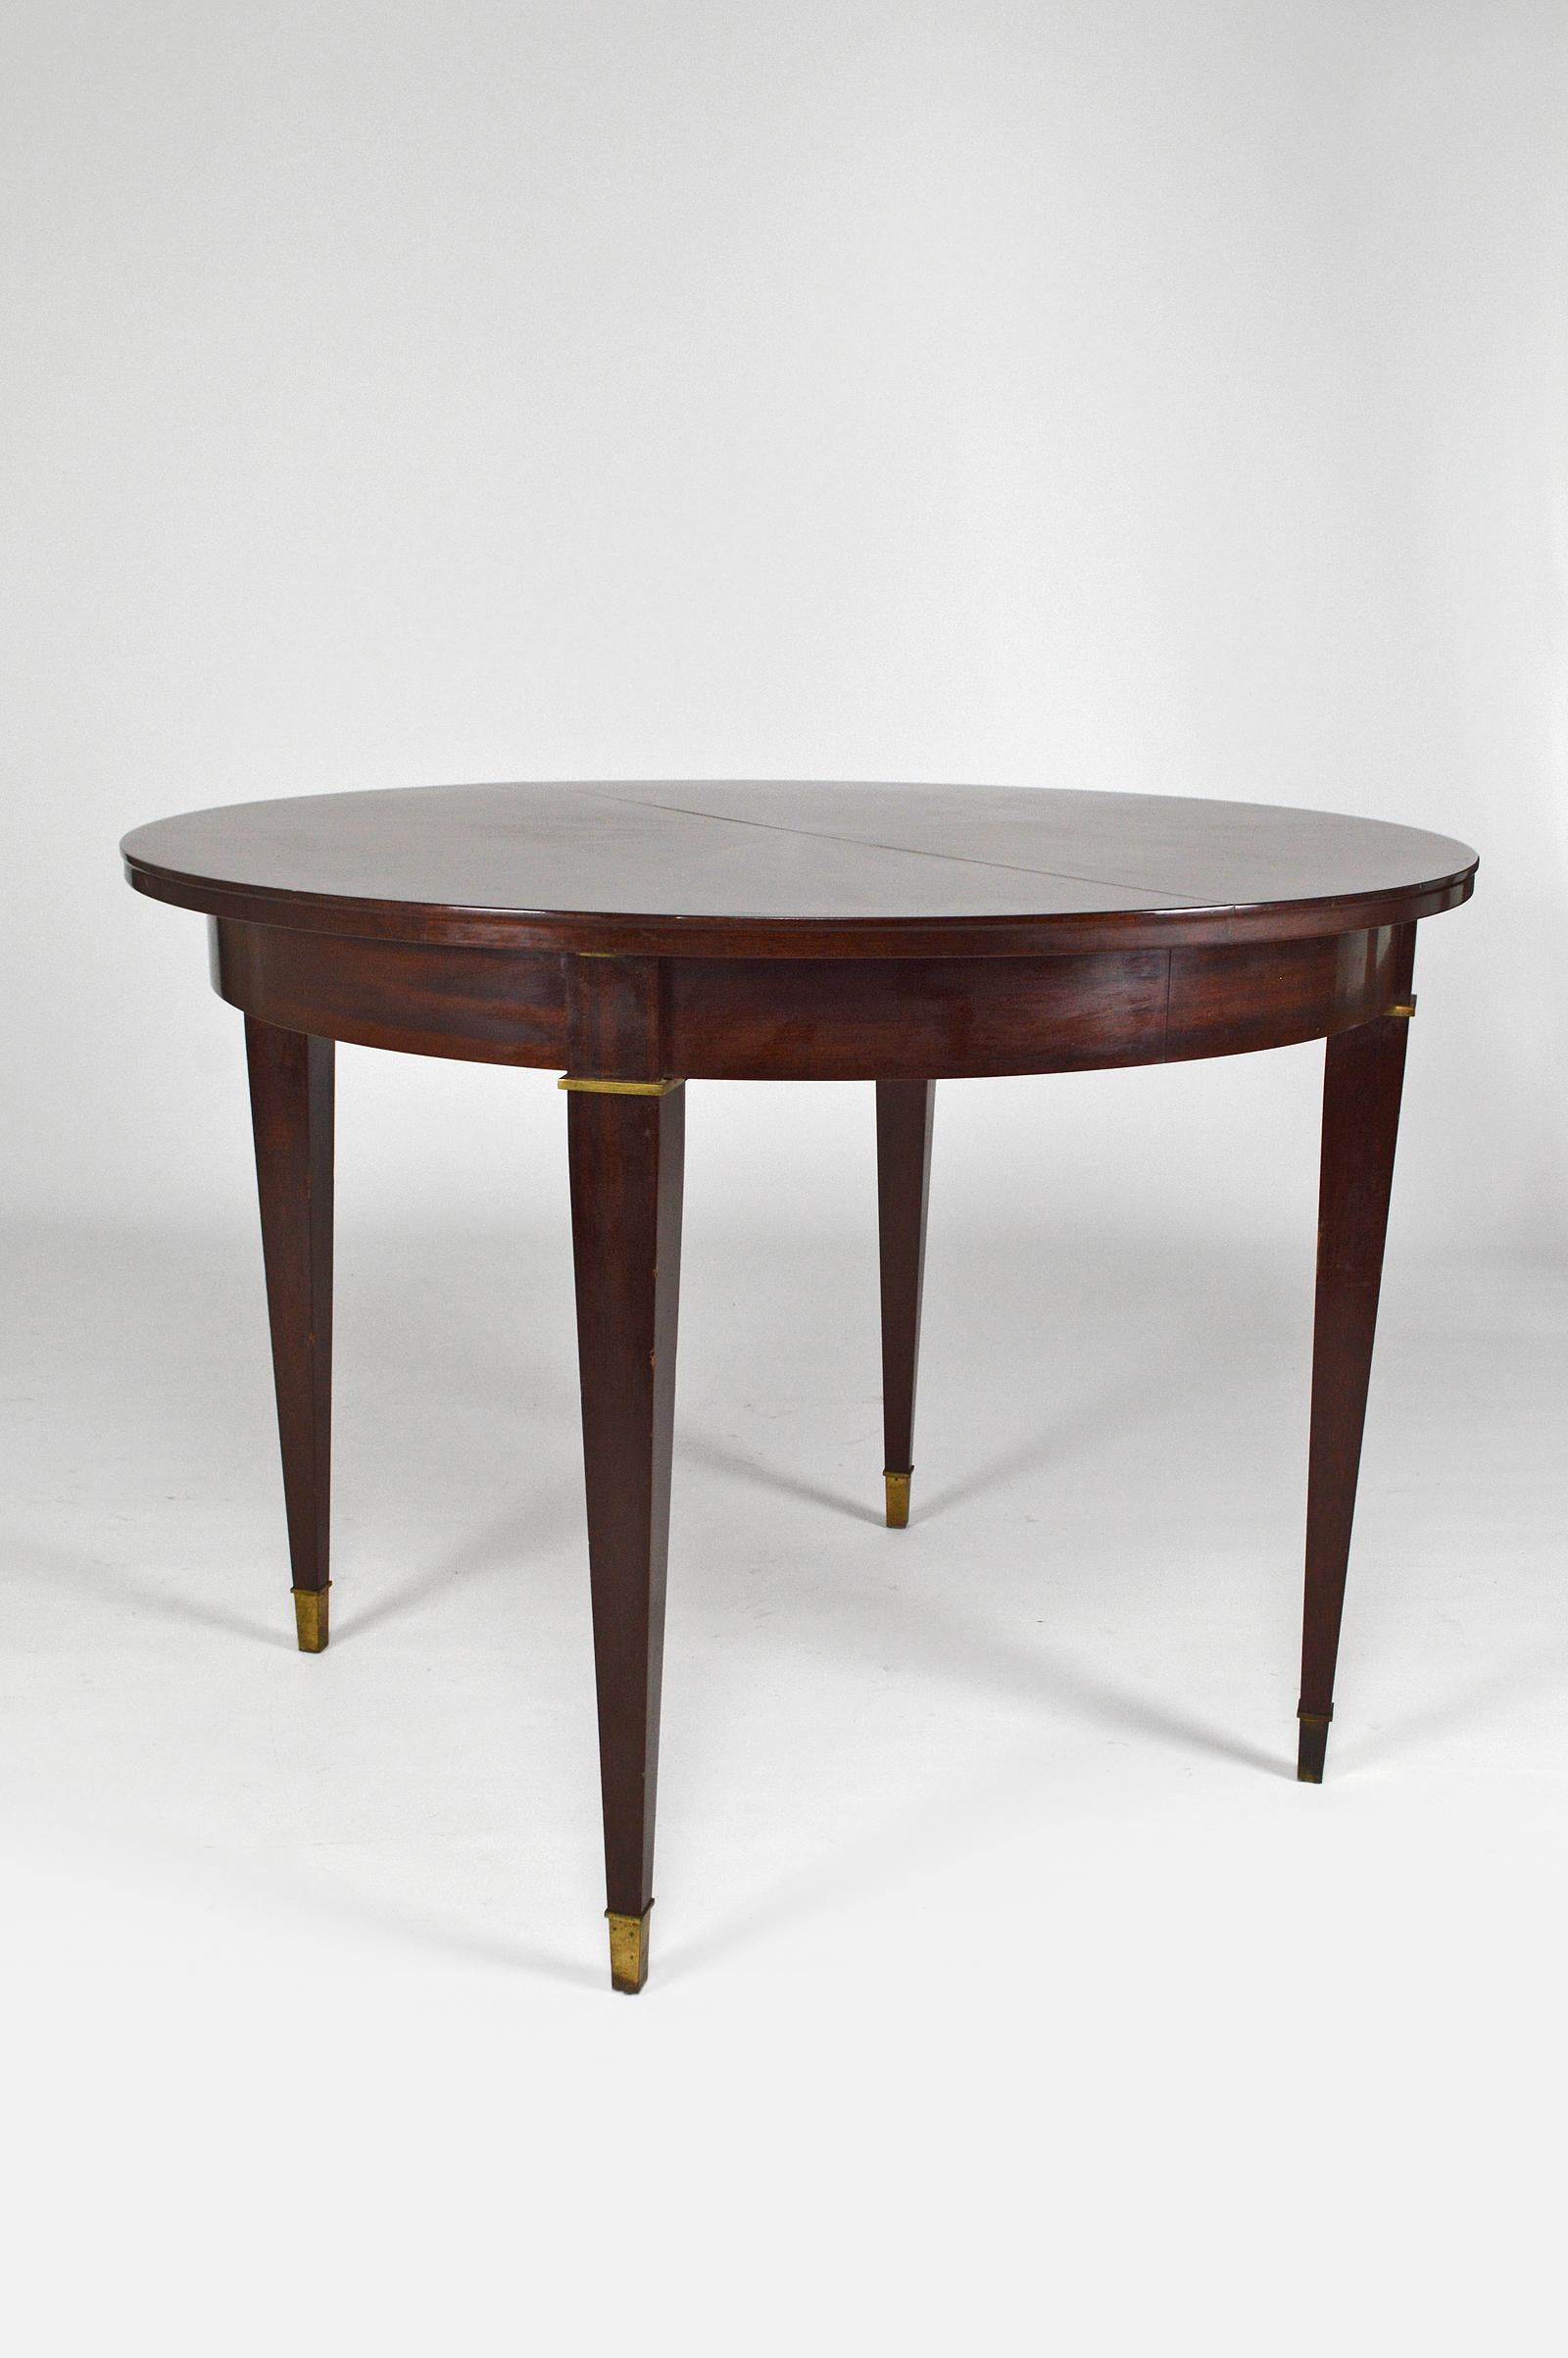 French Art Deco Extendable Round Dining Table in Mahogany, by Jacques Adnet, circa 1940